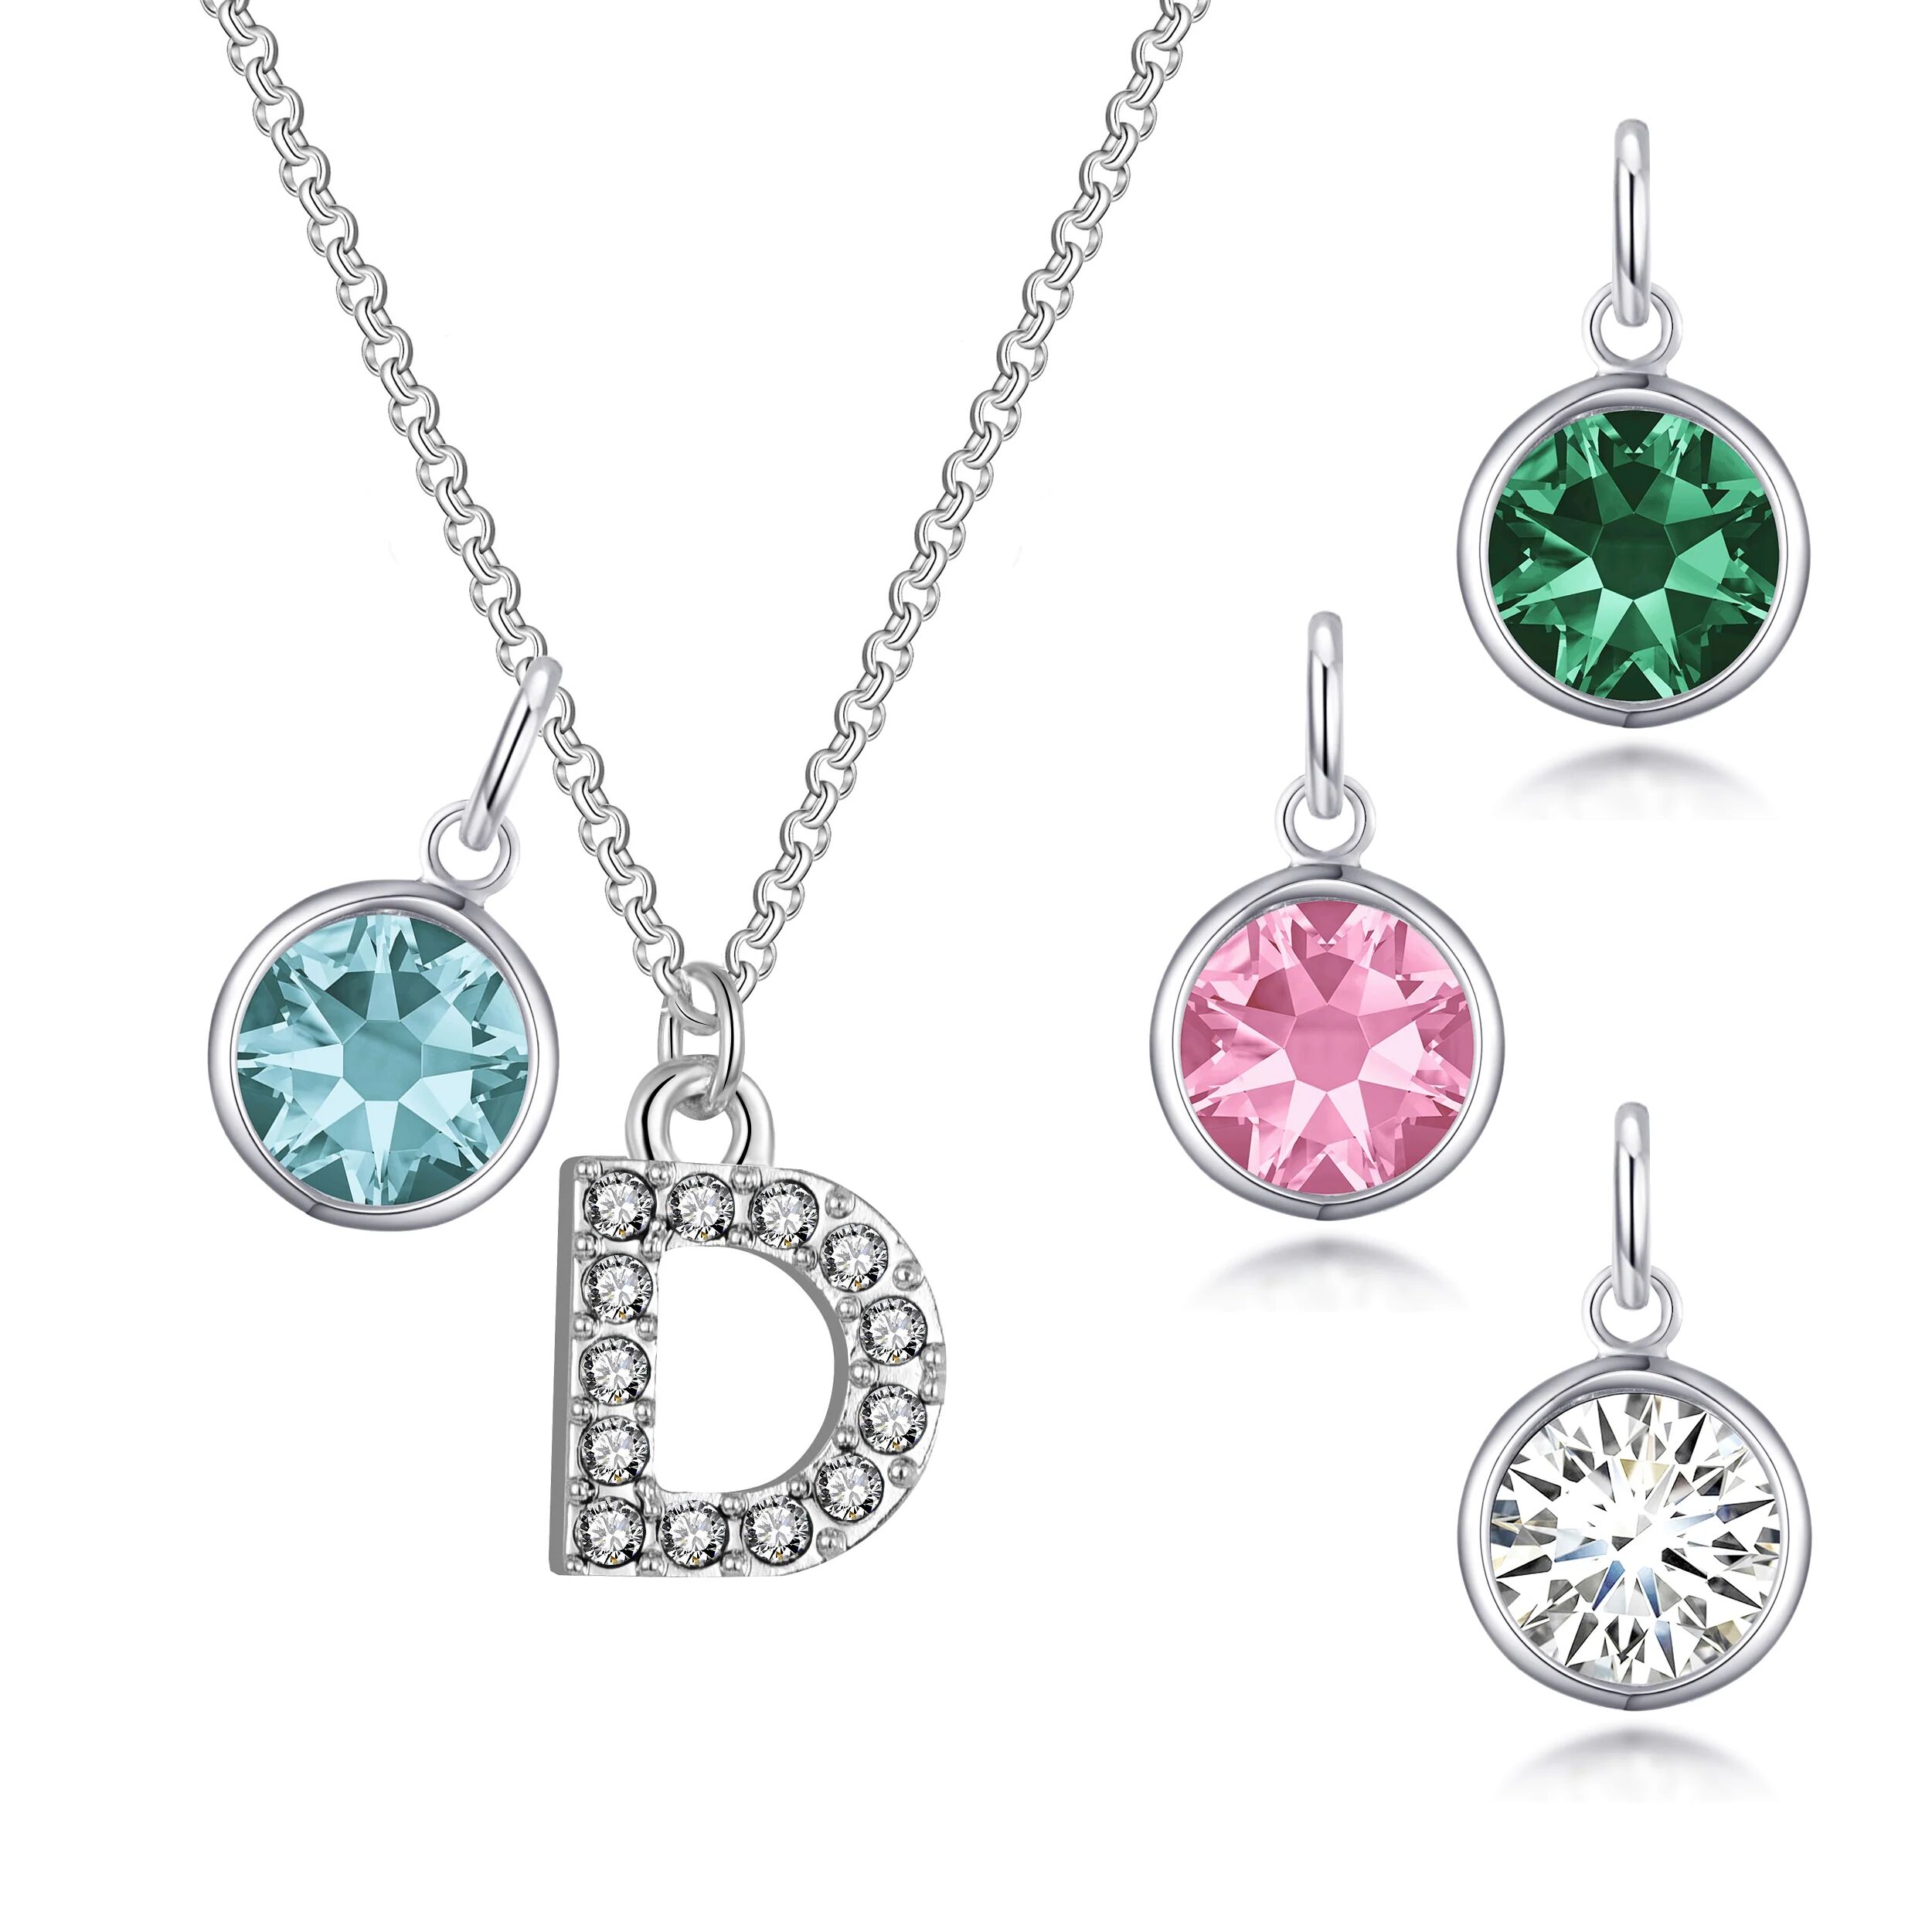 Philip Jones Jewellery Pave Initial D Necklace with Birthstone Charm Created with Zircondia® Crystals